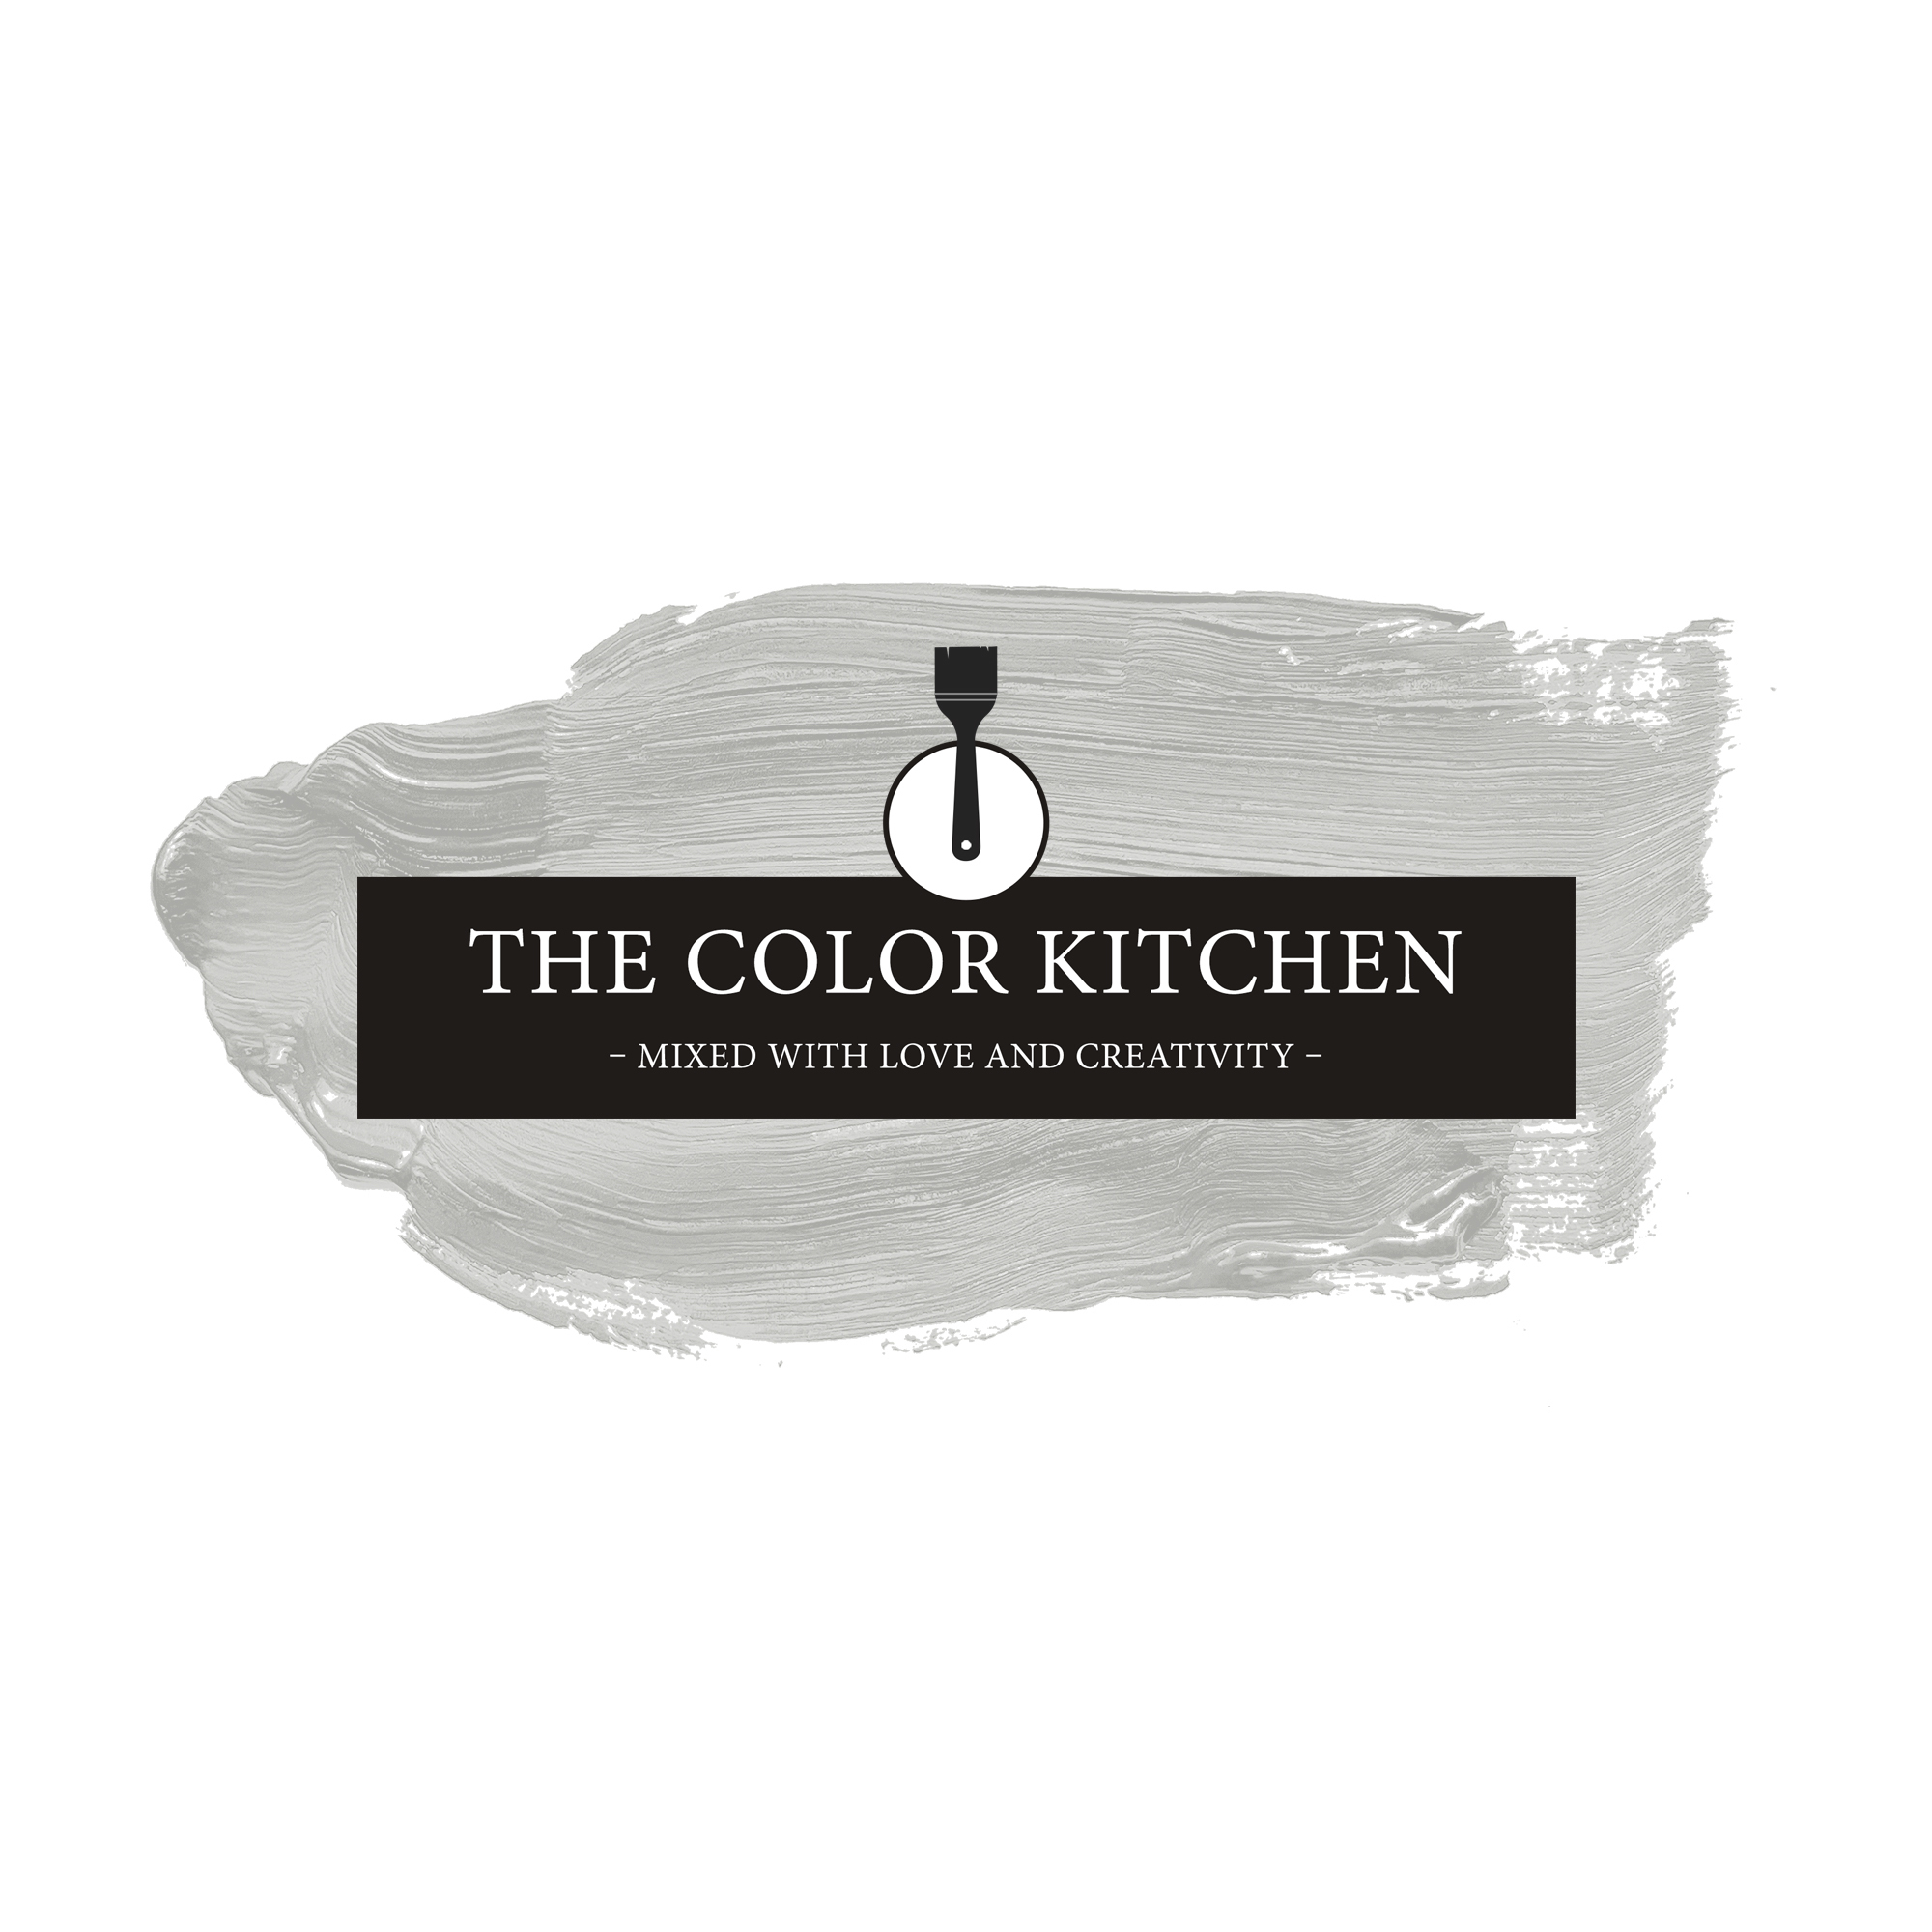 The Color Kitchen Pure Pitaya 2,5 l